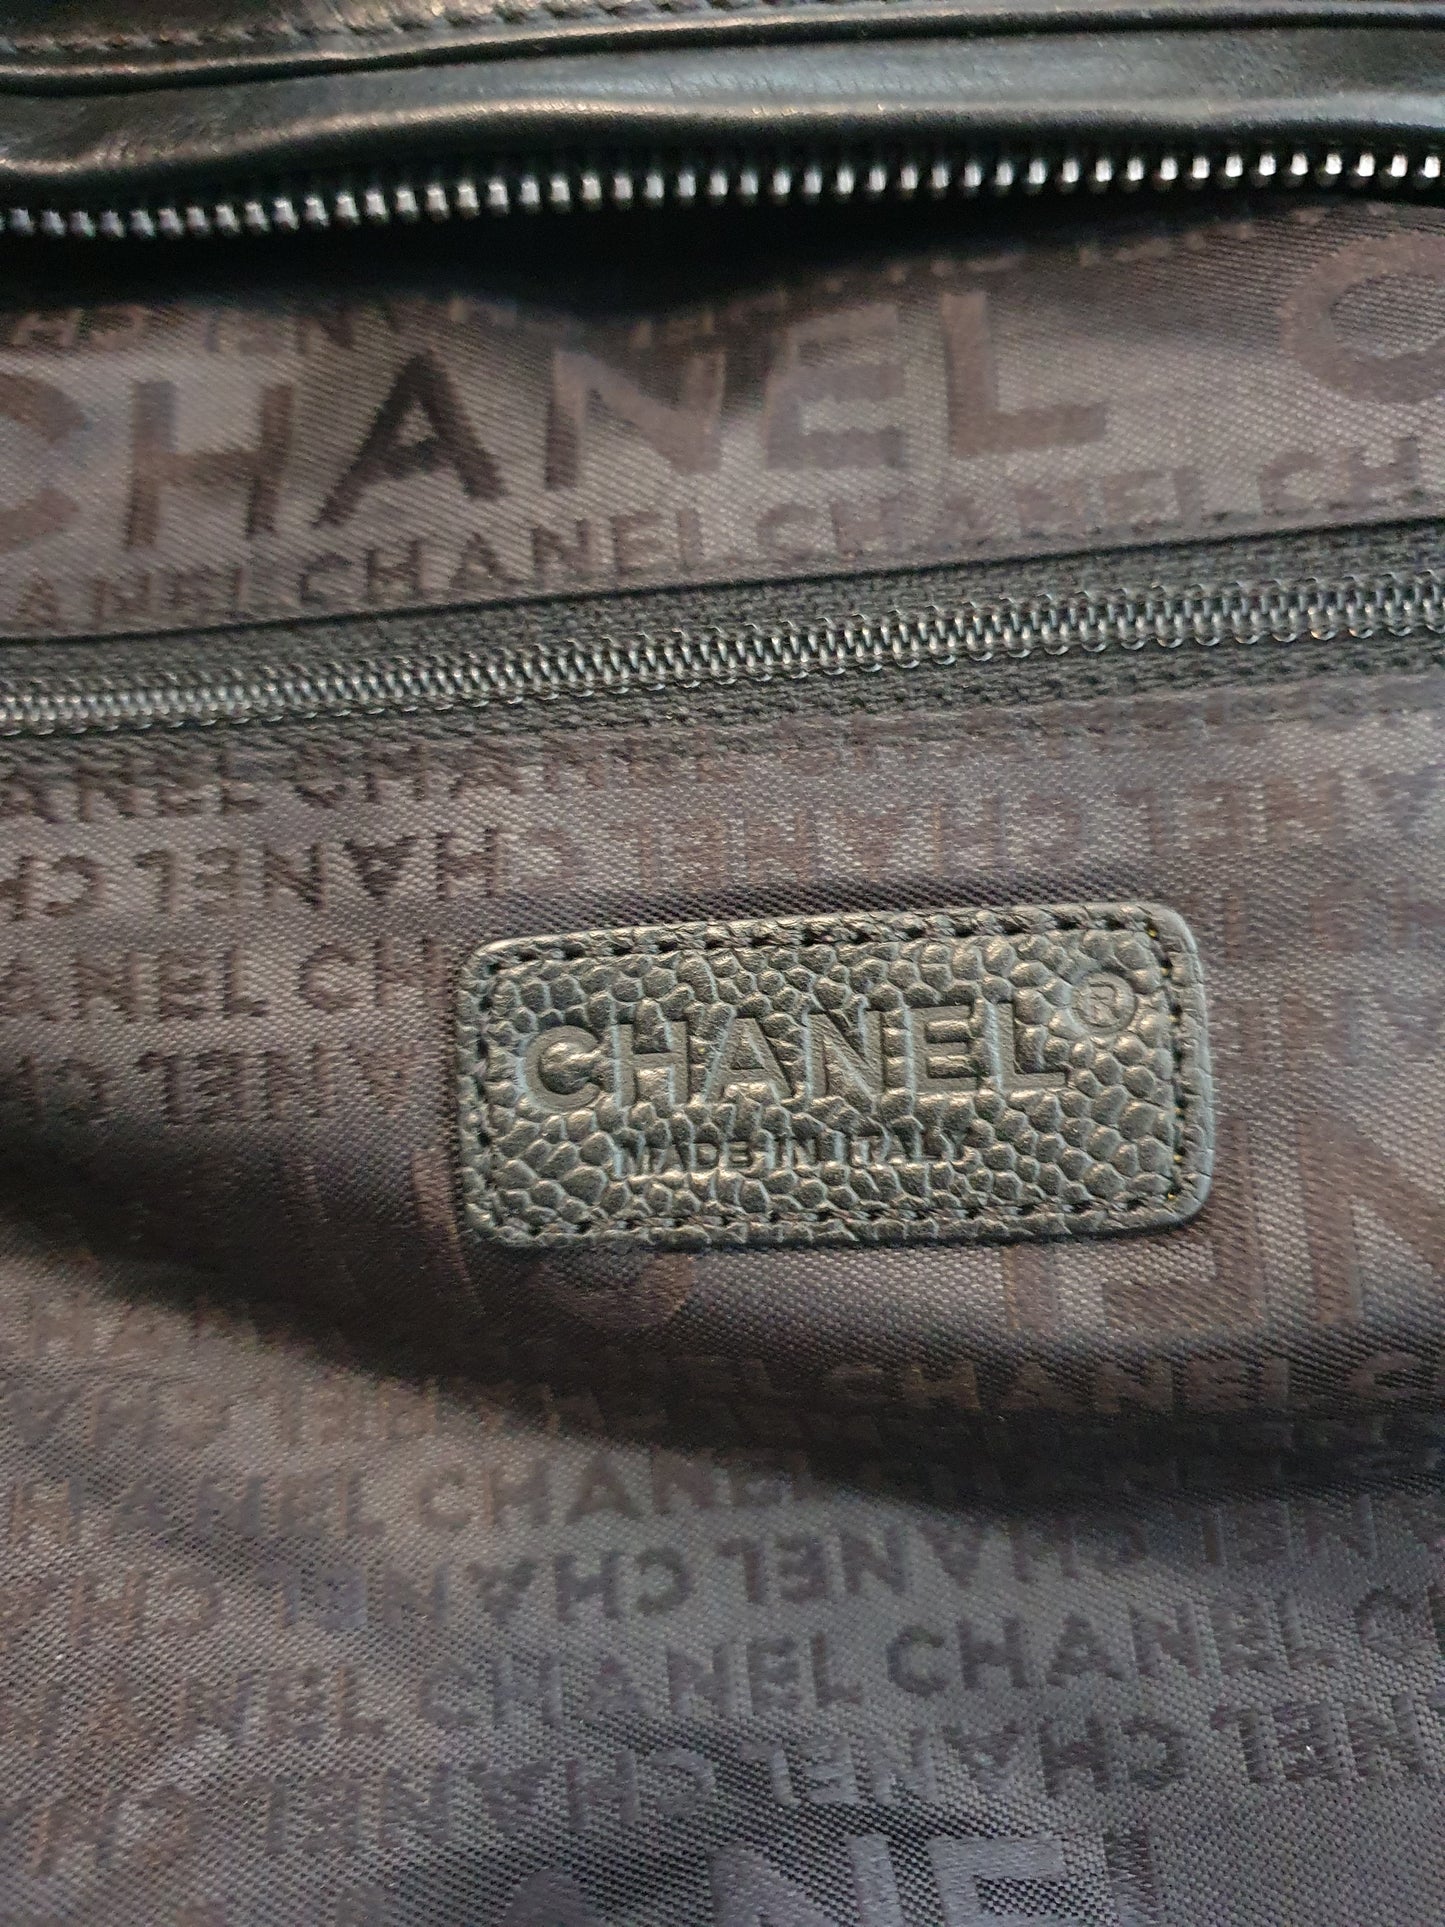 Chanel box leather and tweed bag